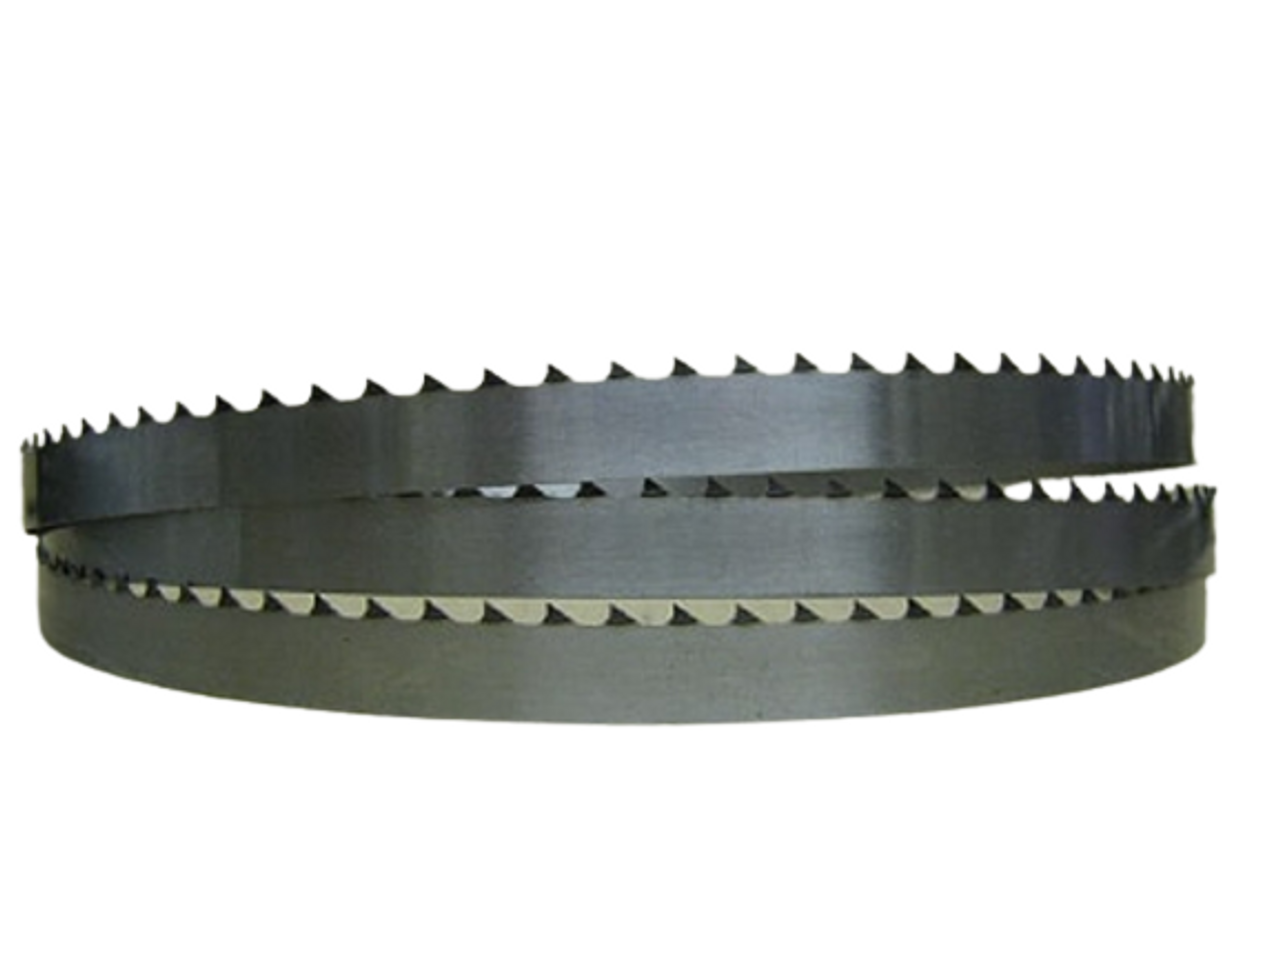 Biro 91 Inch 2312 Pack of 5 Bandsaw Blades